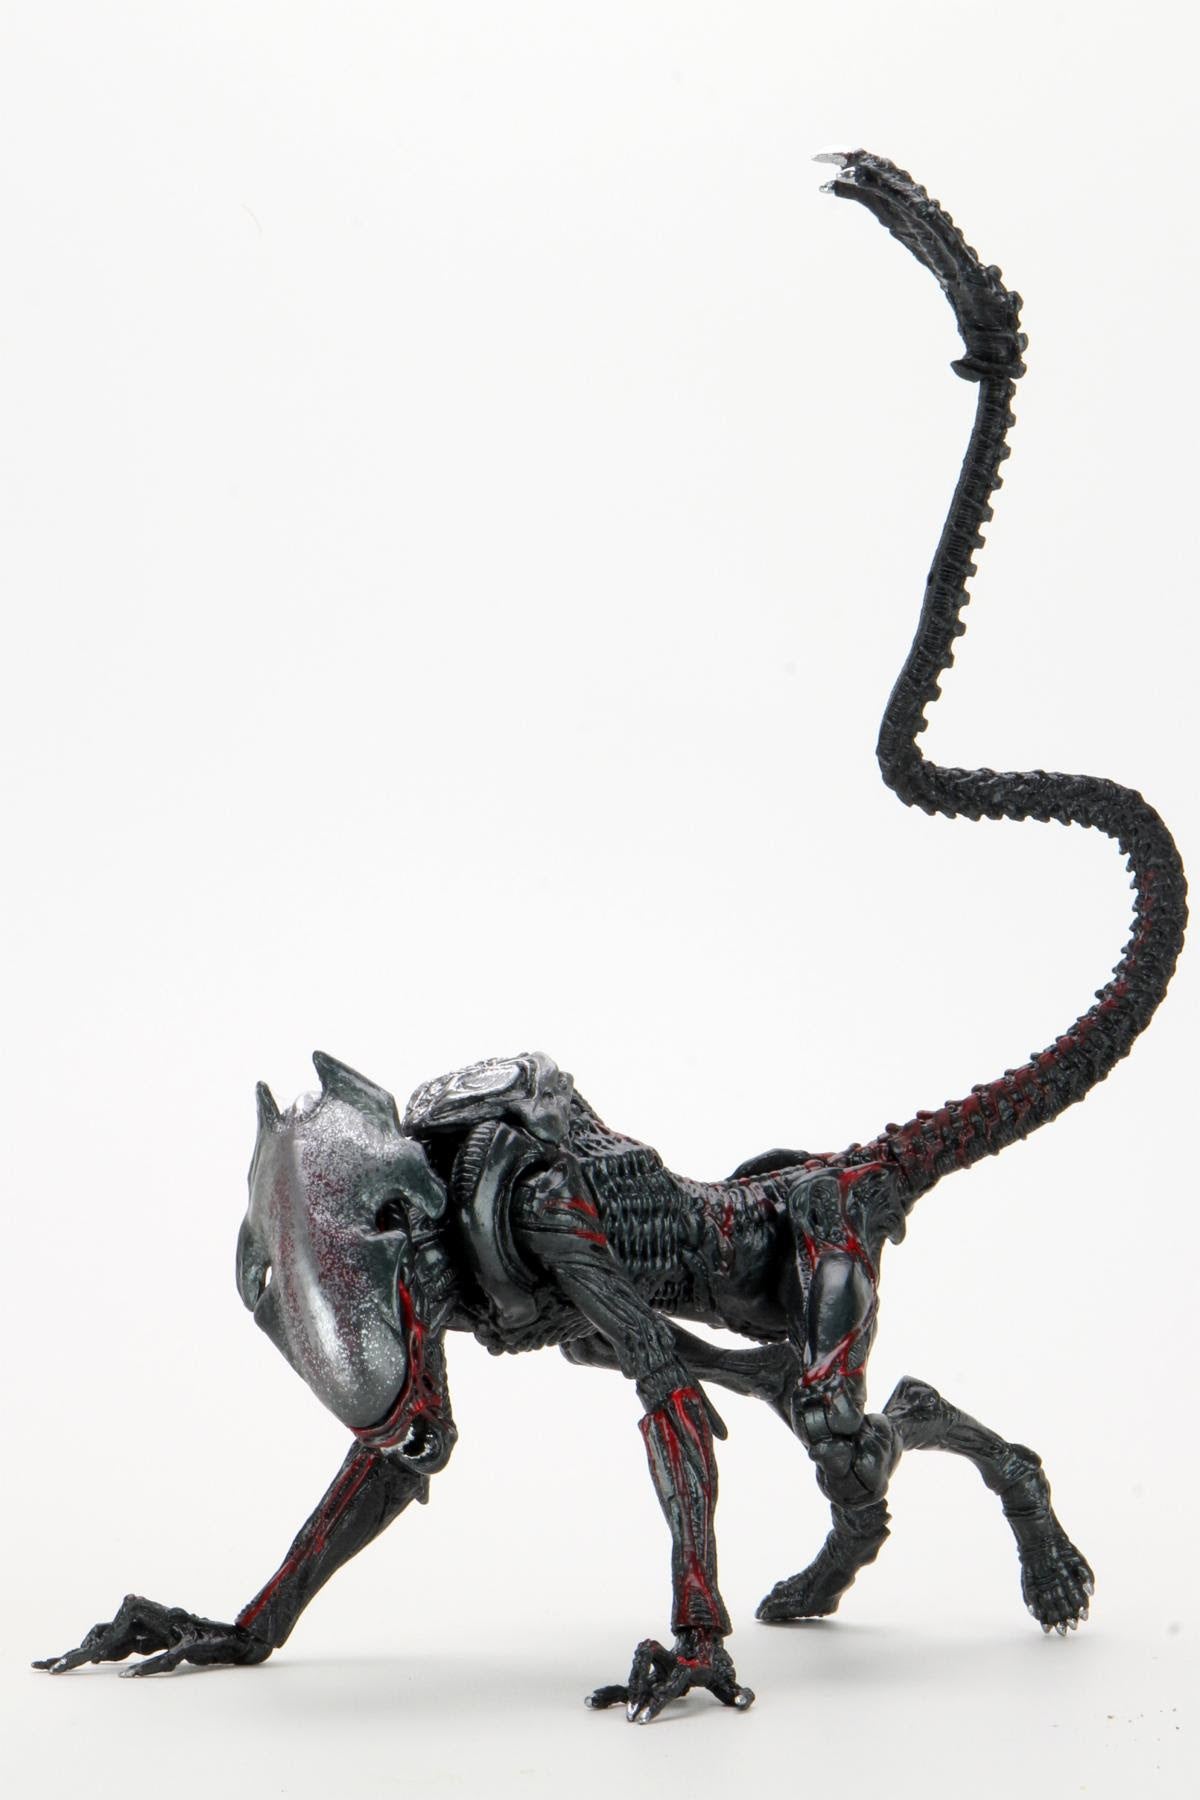 NECA - Aliens - 7" Scale Action Figure - Kenner Tribute Night Cougar Alien